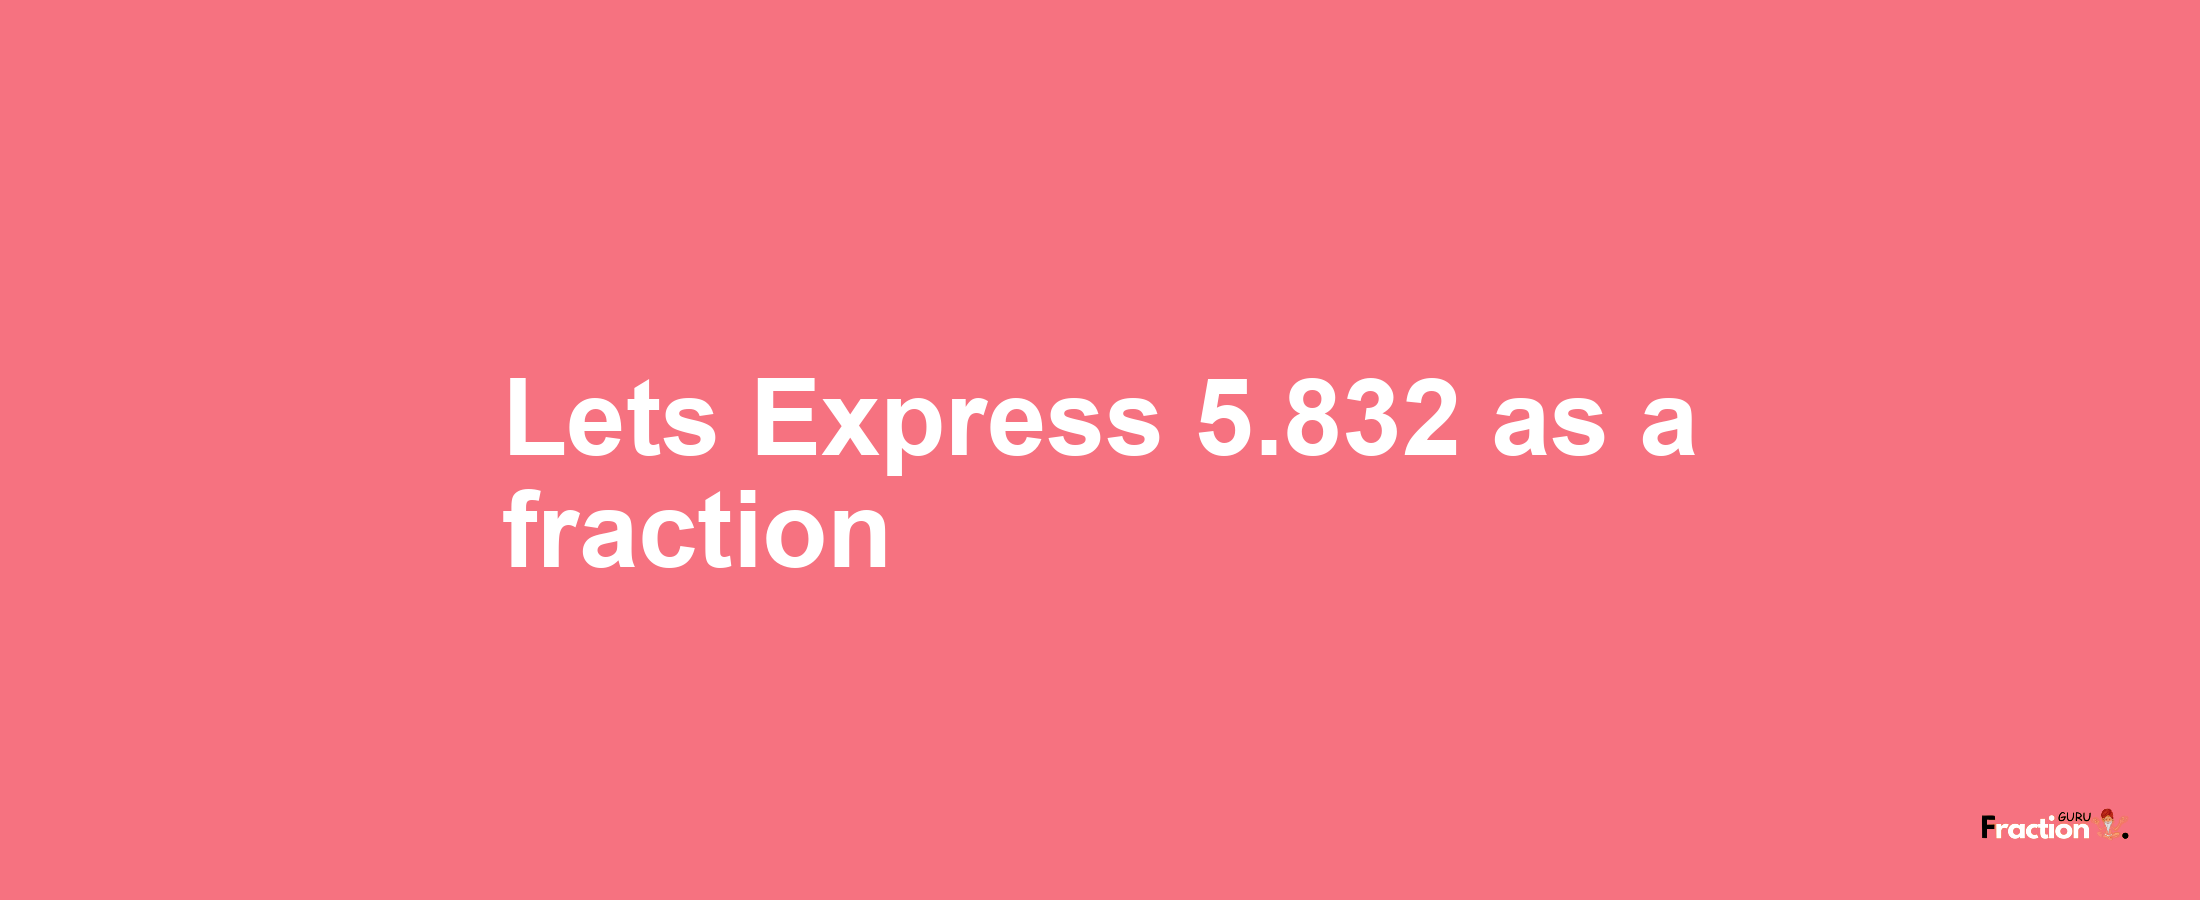 Lets Express 5.832 as afraction